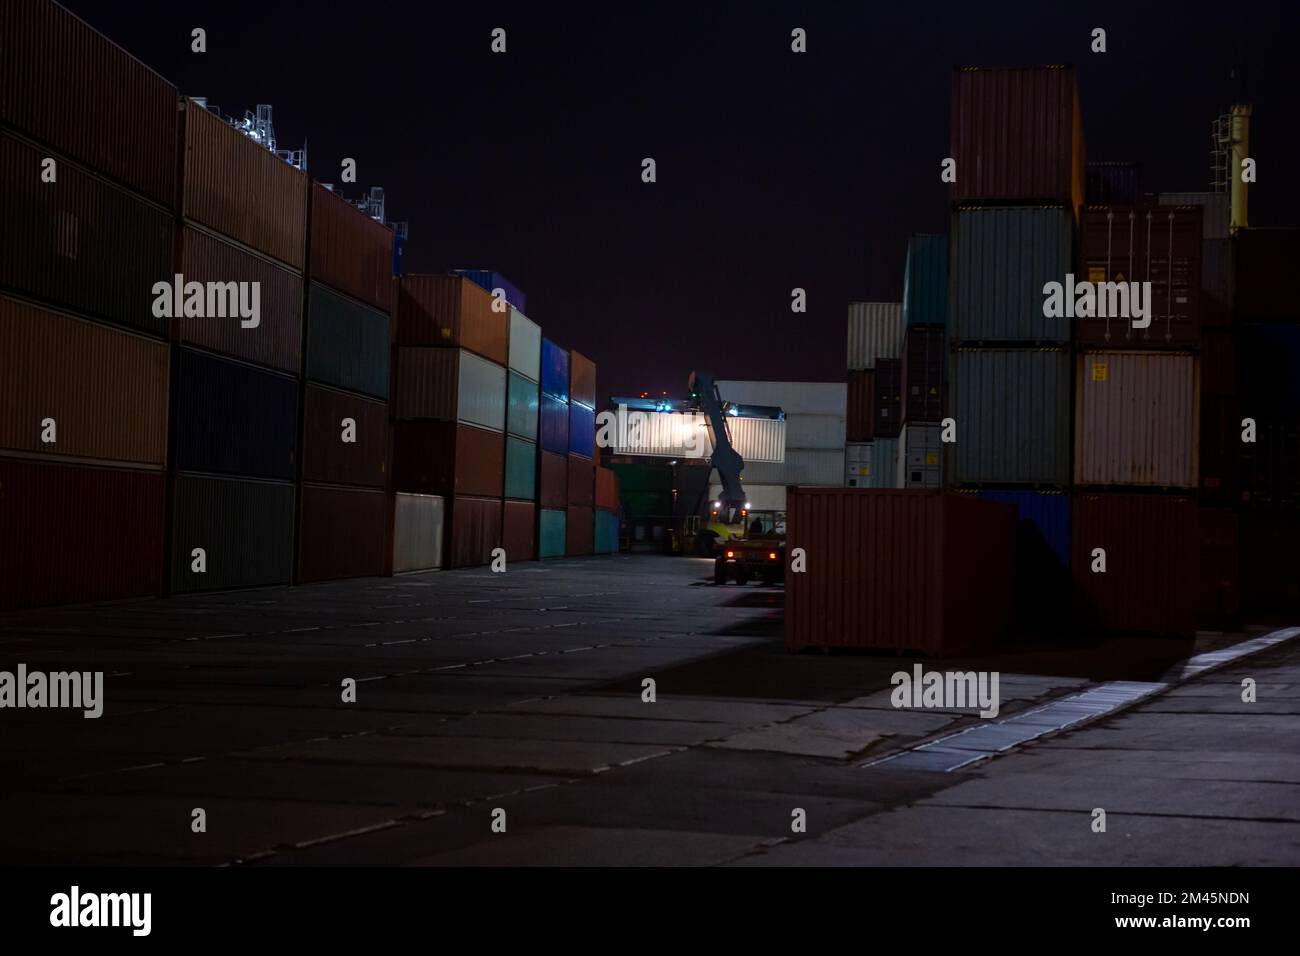 Reach Stacker during operation. Reach-stacker container loader during night work. Industrial port container terminal. Container stacker in the port at Stock Photo